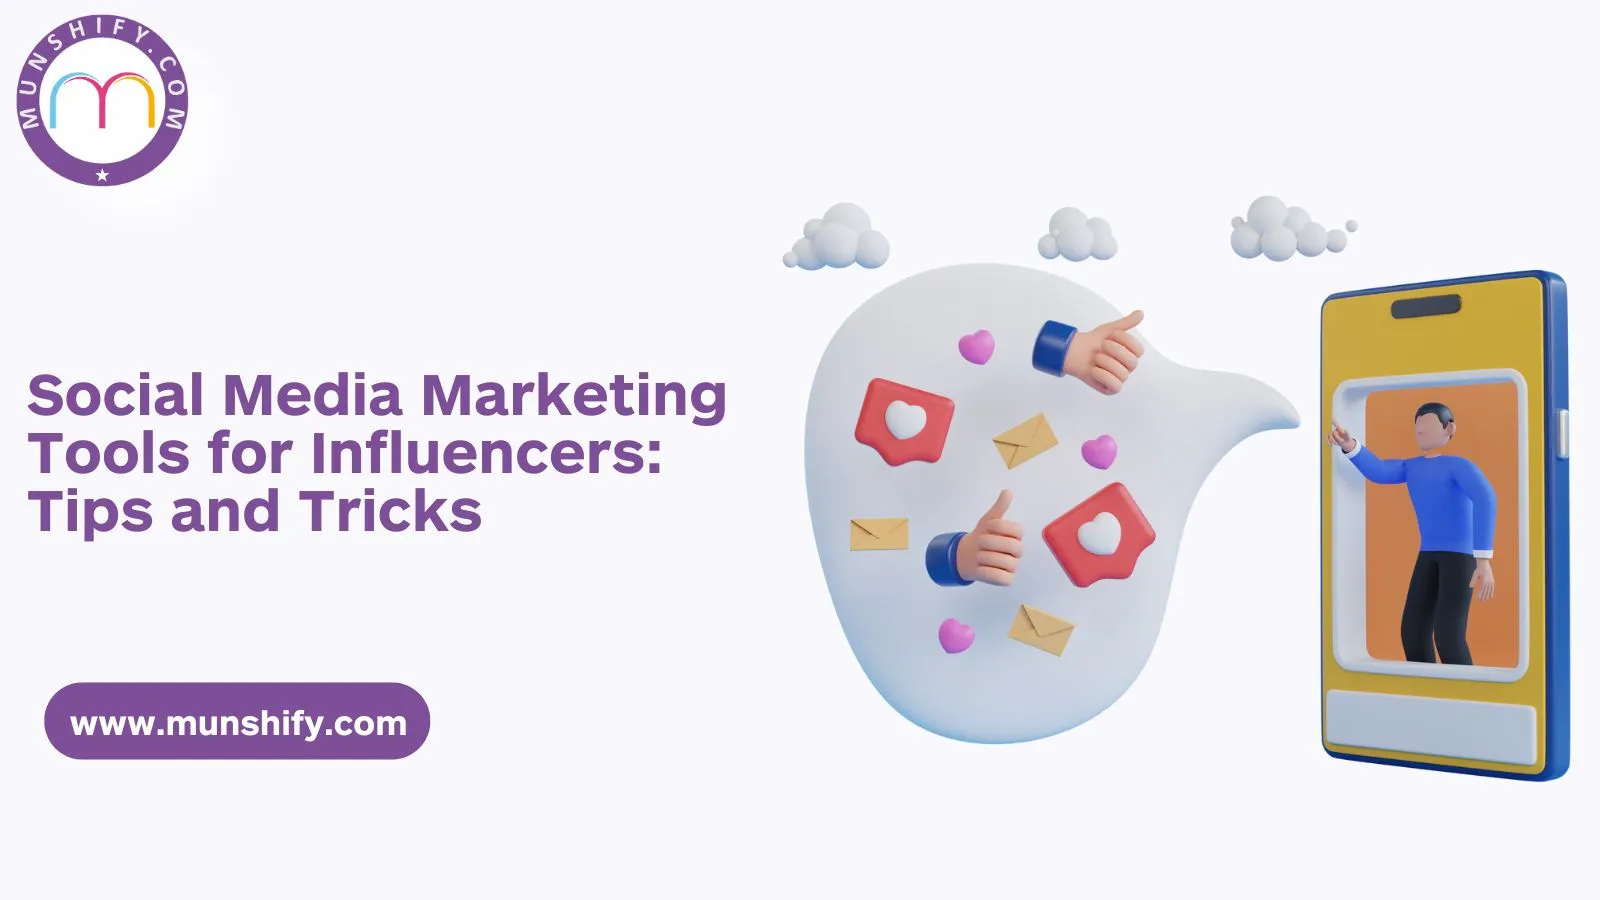 Social Media Marketing Tools for Influencers: Tips and Tricks  